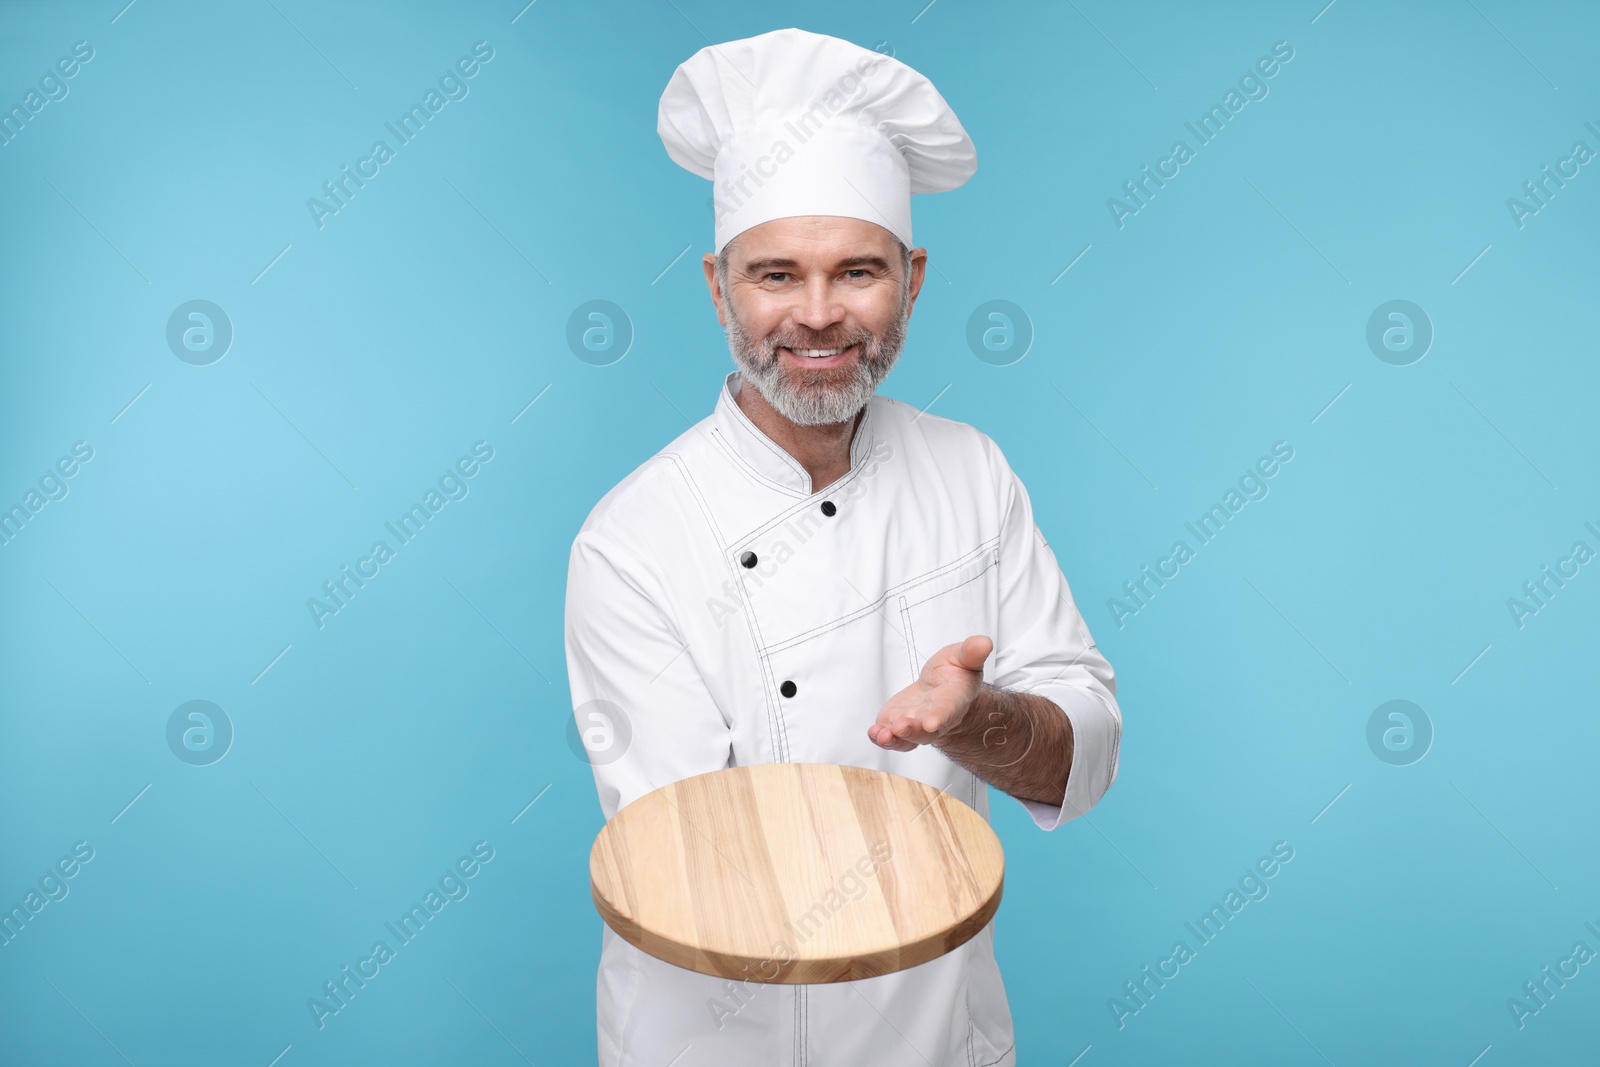 Photo of Happy chef in uniform showing wooden board on light blue background